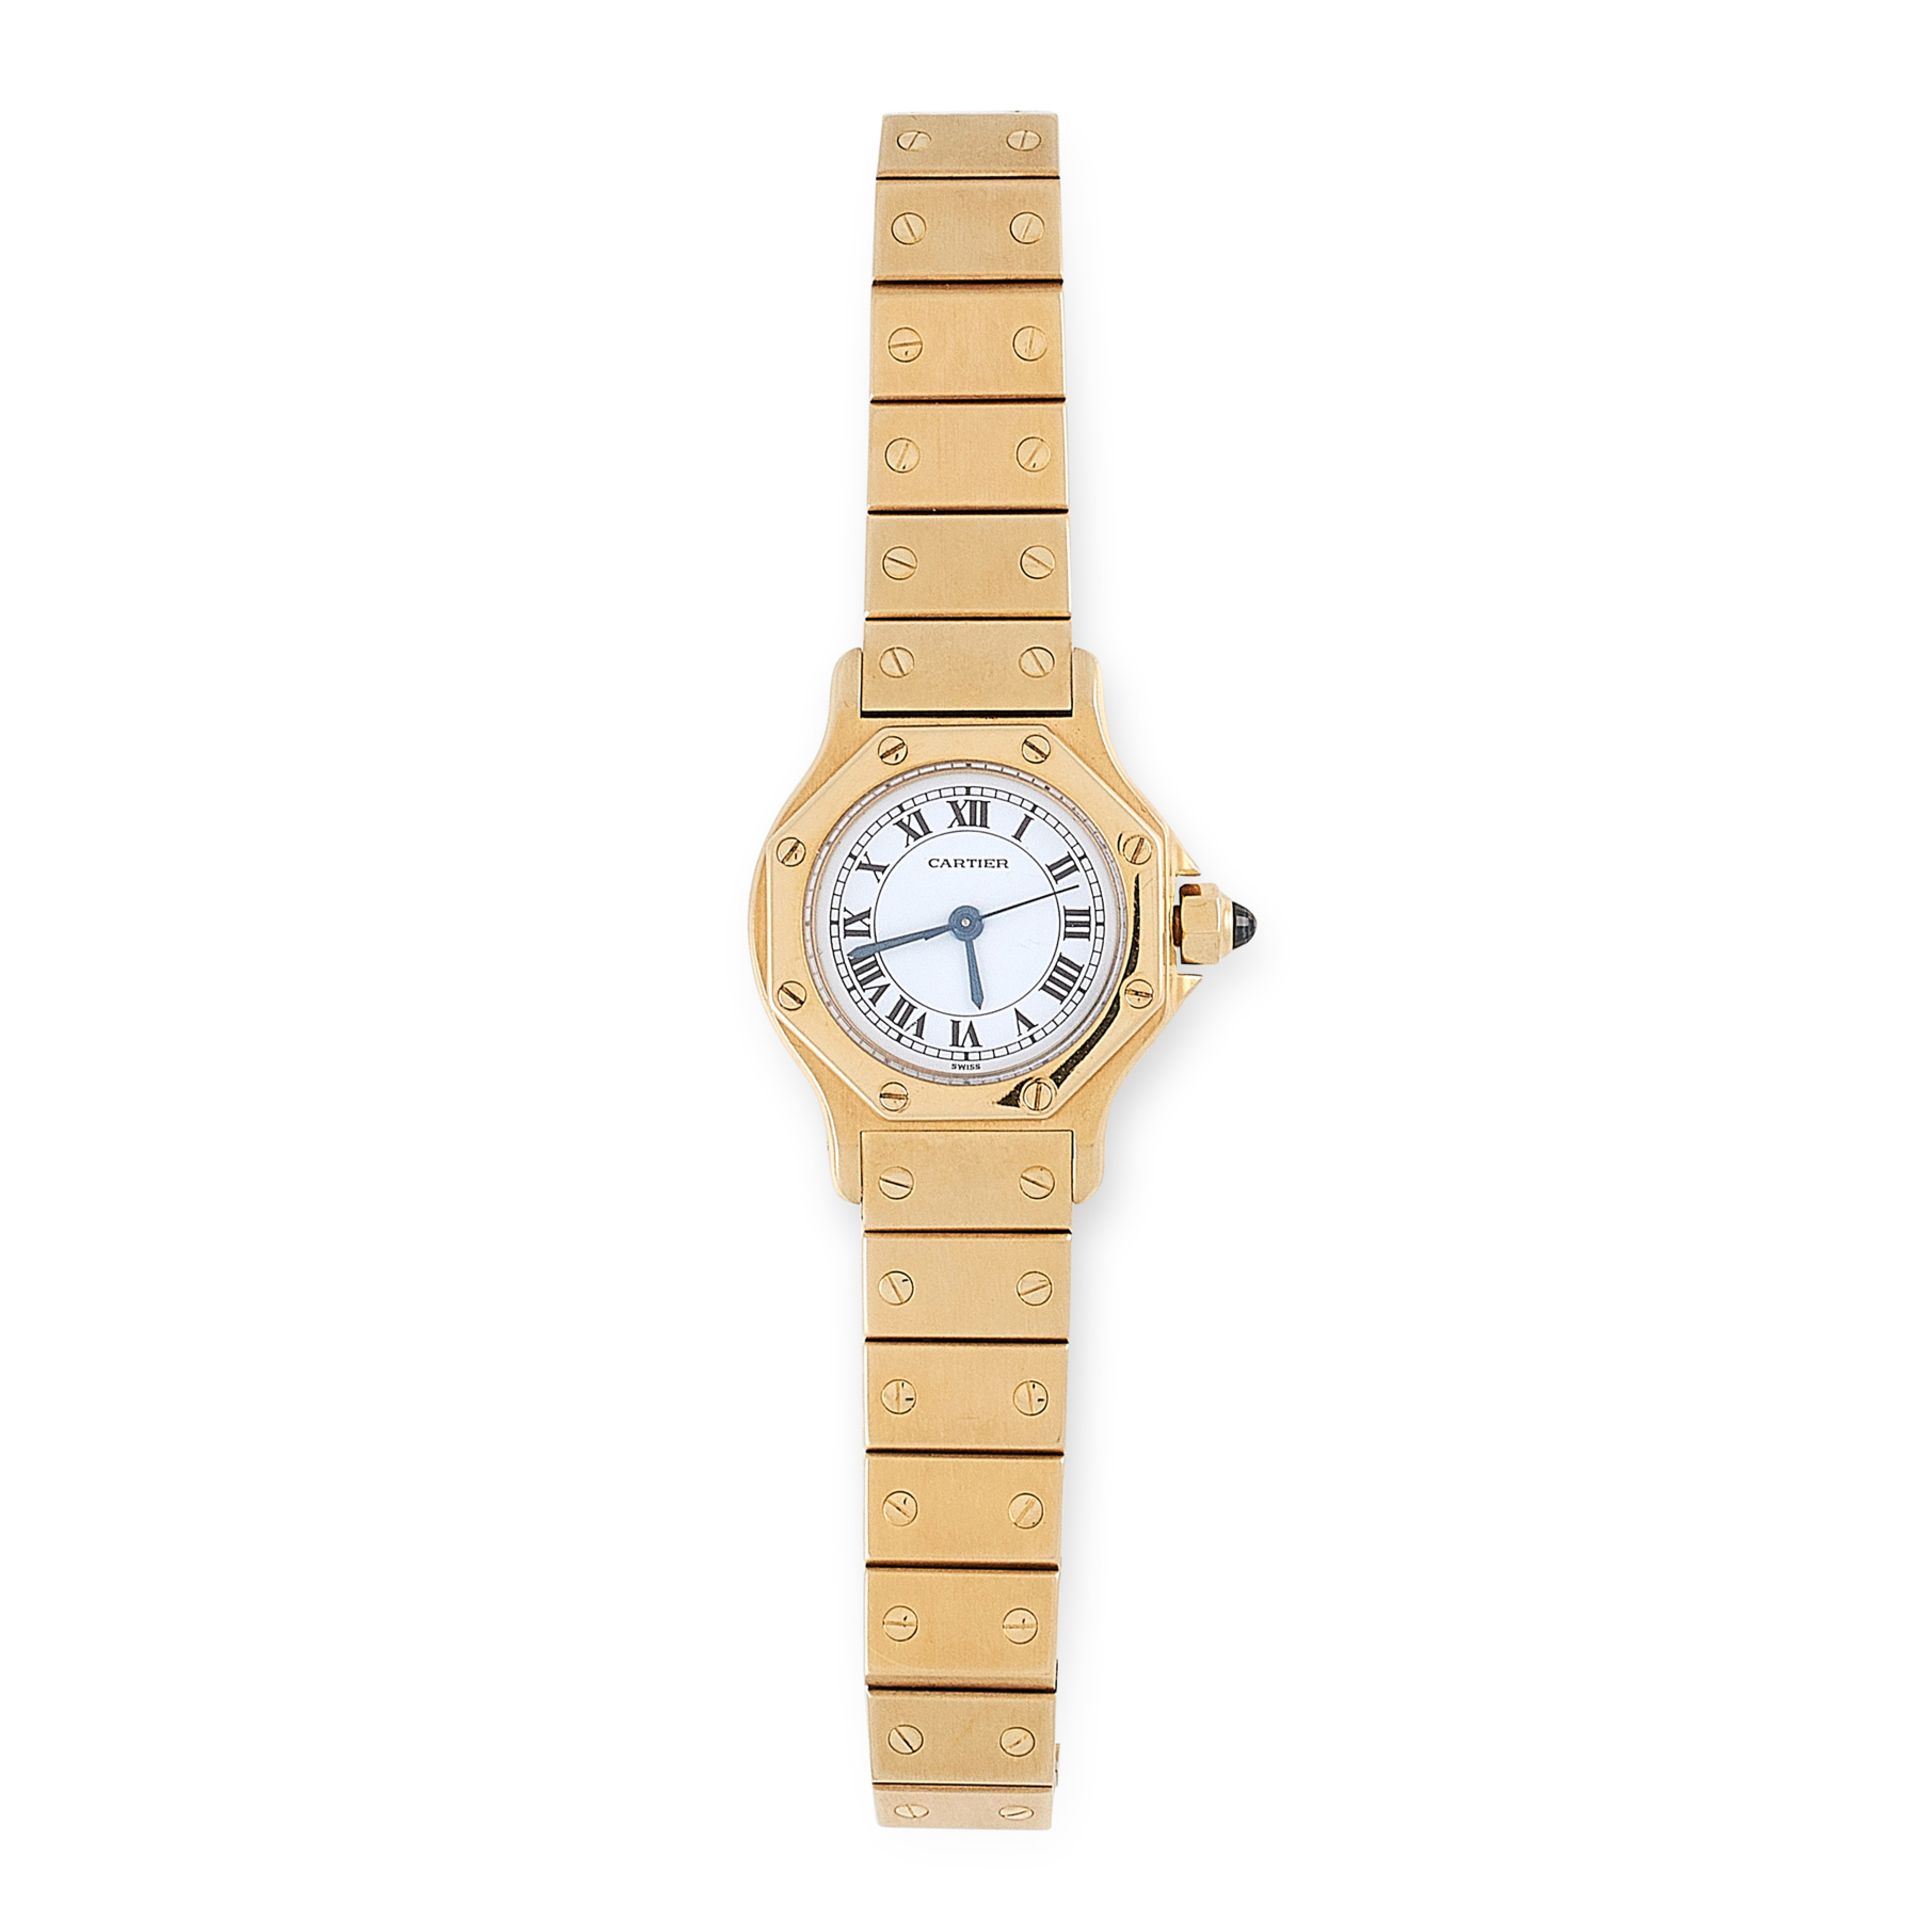 A CARTIER SANTOS WRIST WATCH in 18ct yellow gold, automatic movement, 26mm case, white dial, black